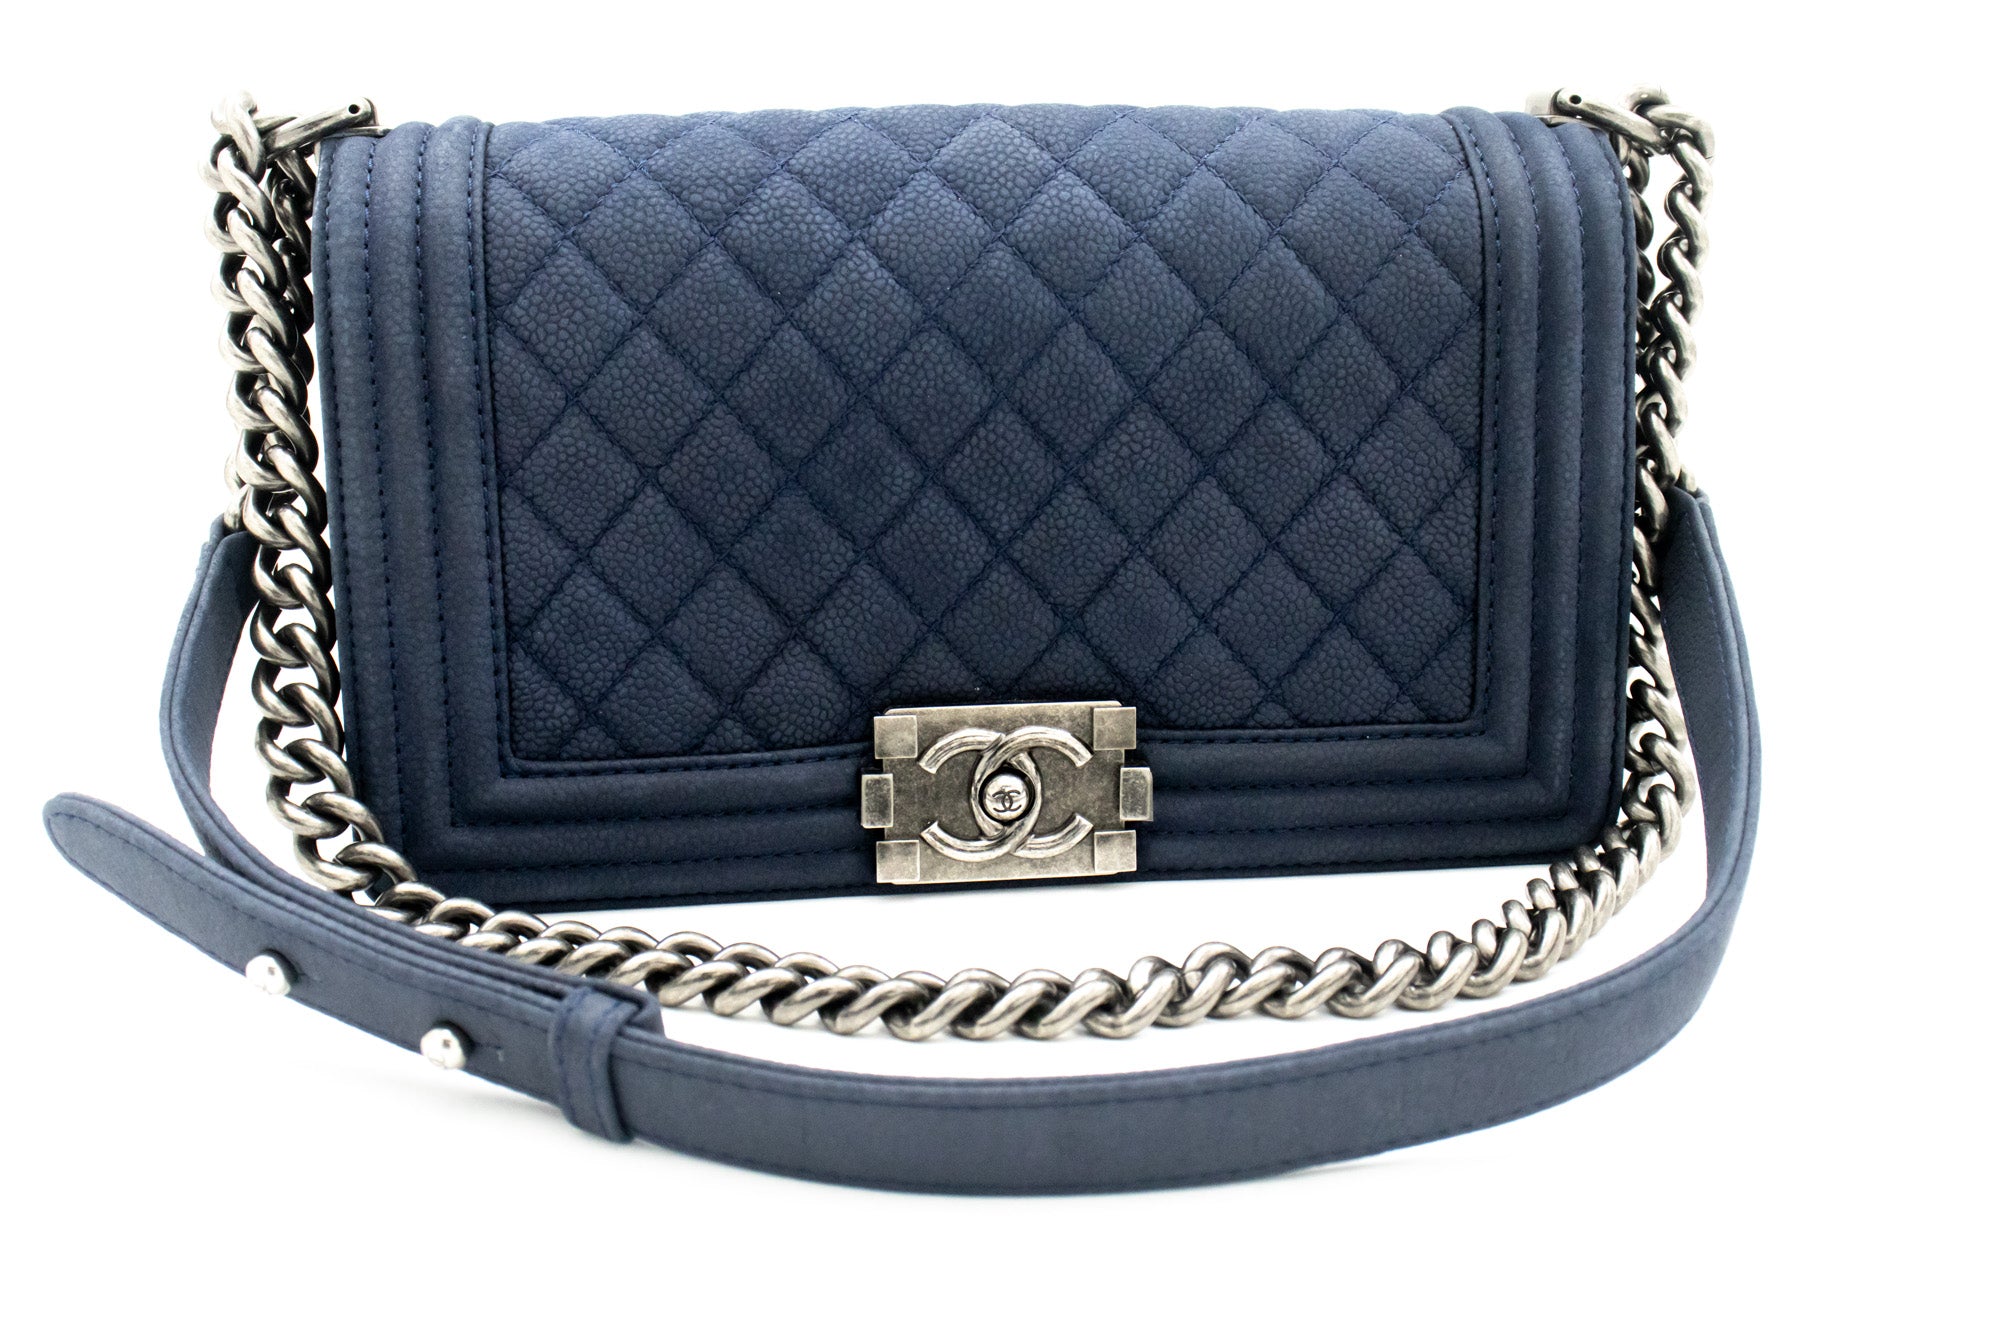 Chanel GHW Dark Navy Blue Quilted Lambskin Small Double Flap Bag 6C26a